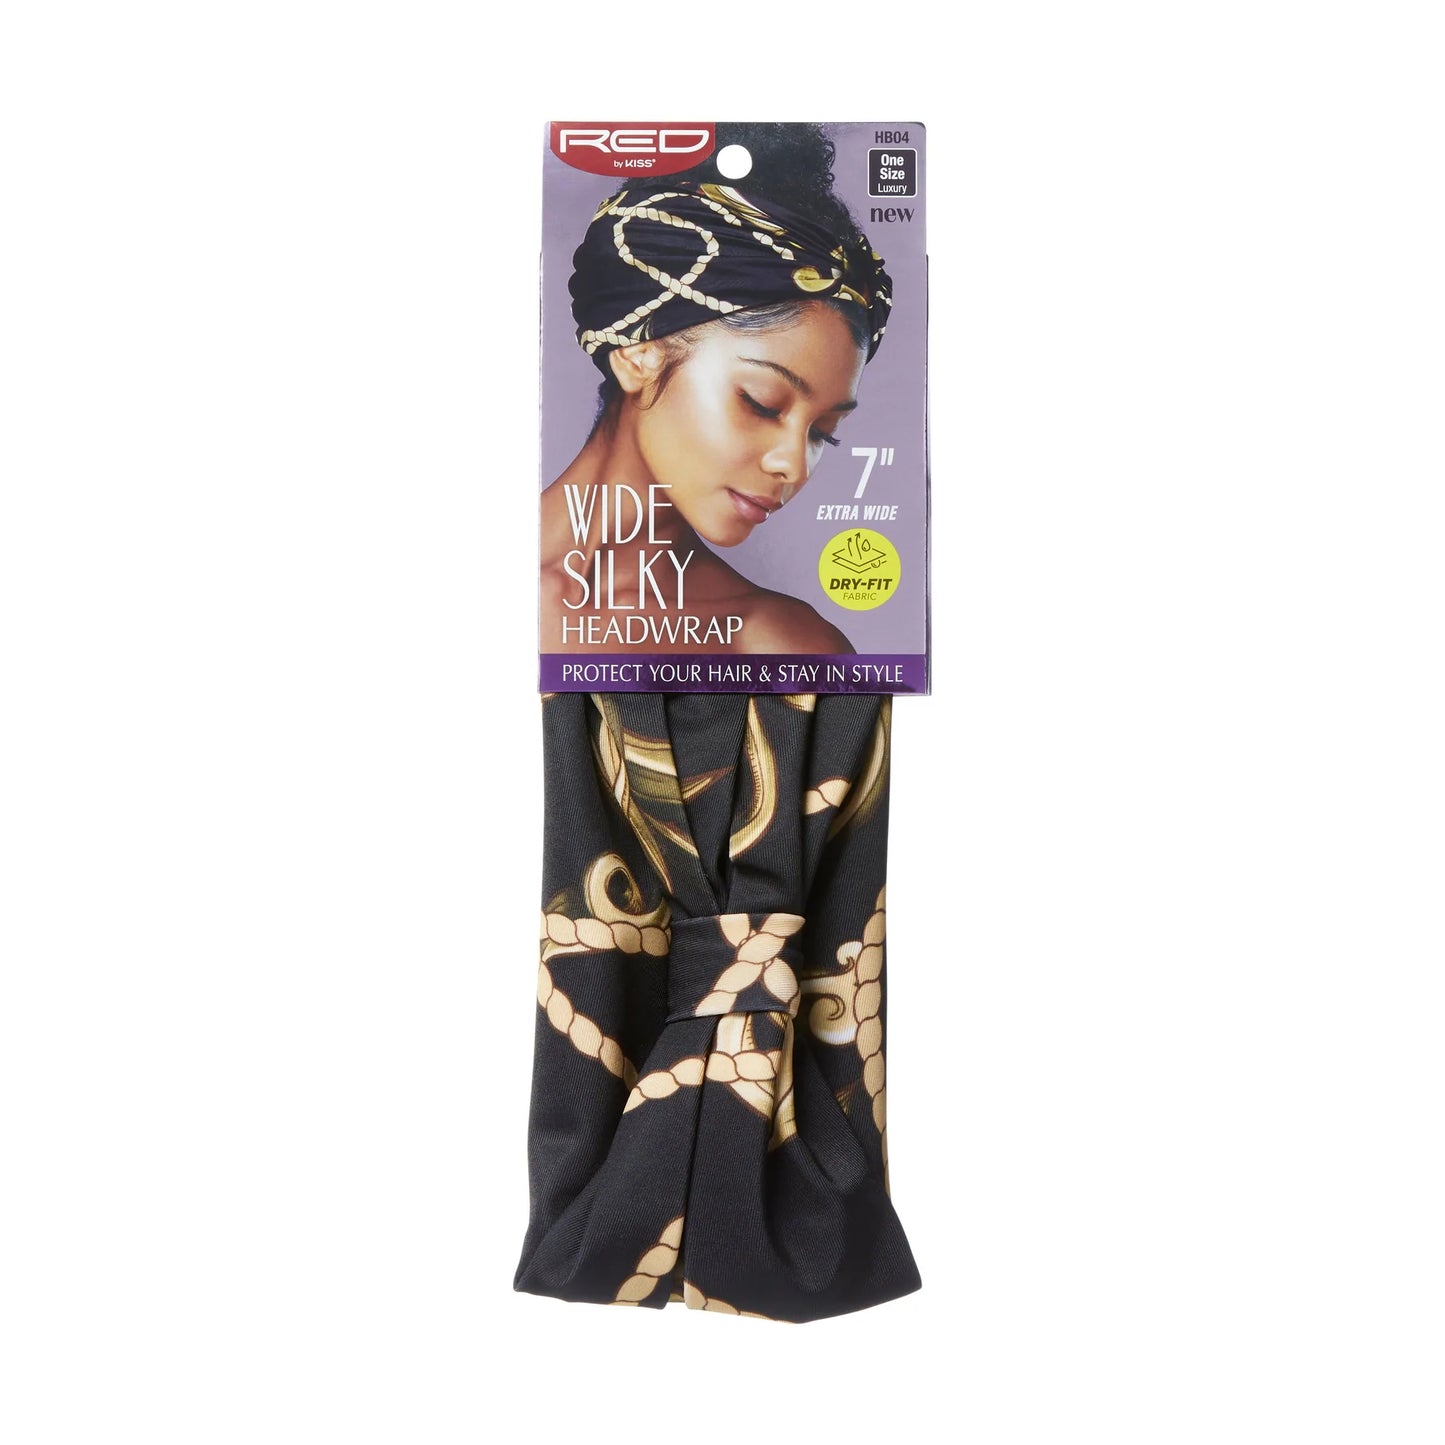 Wide Dry Fit Headwrap HB05